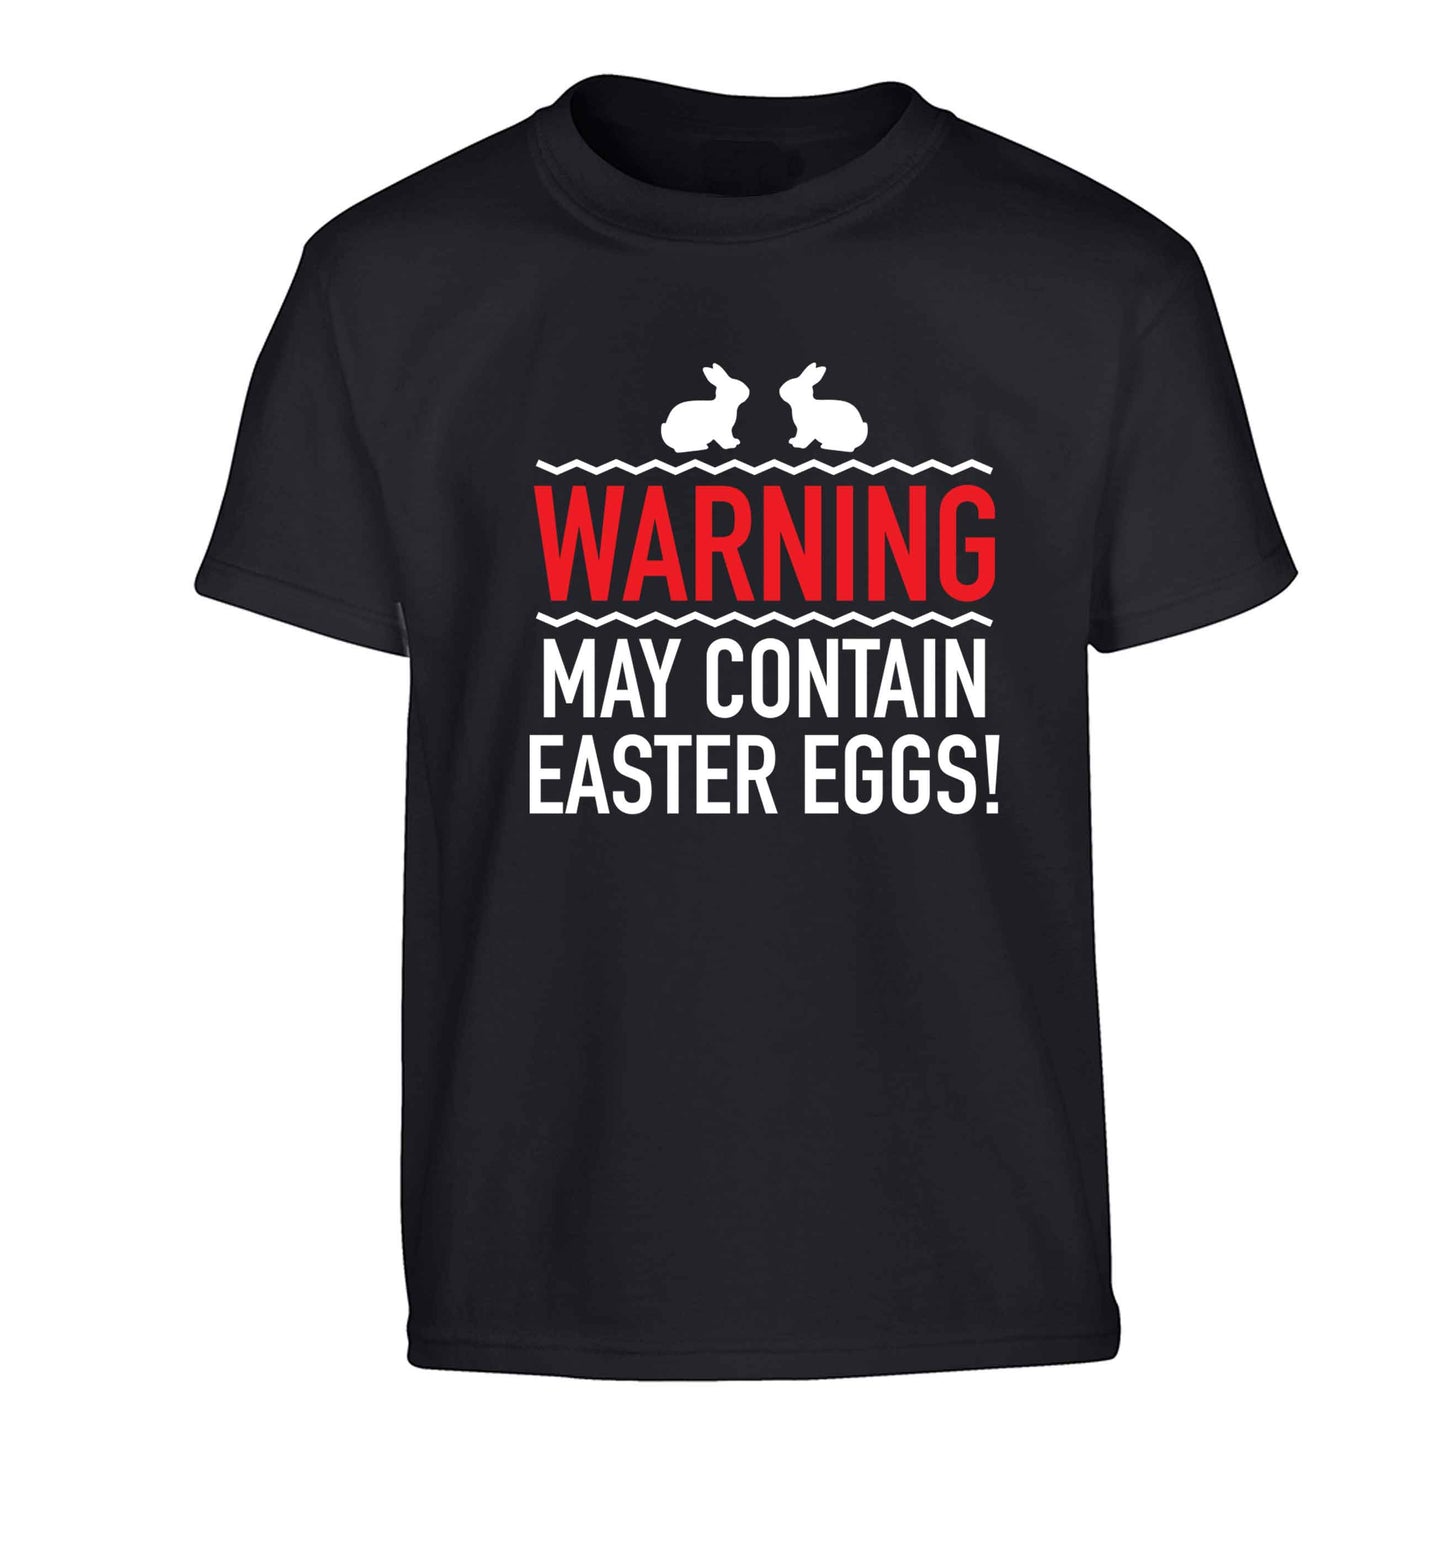 Warning may contain Easter eggs Children's black Tshirt 12-13 Years